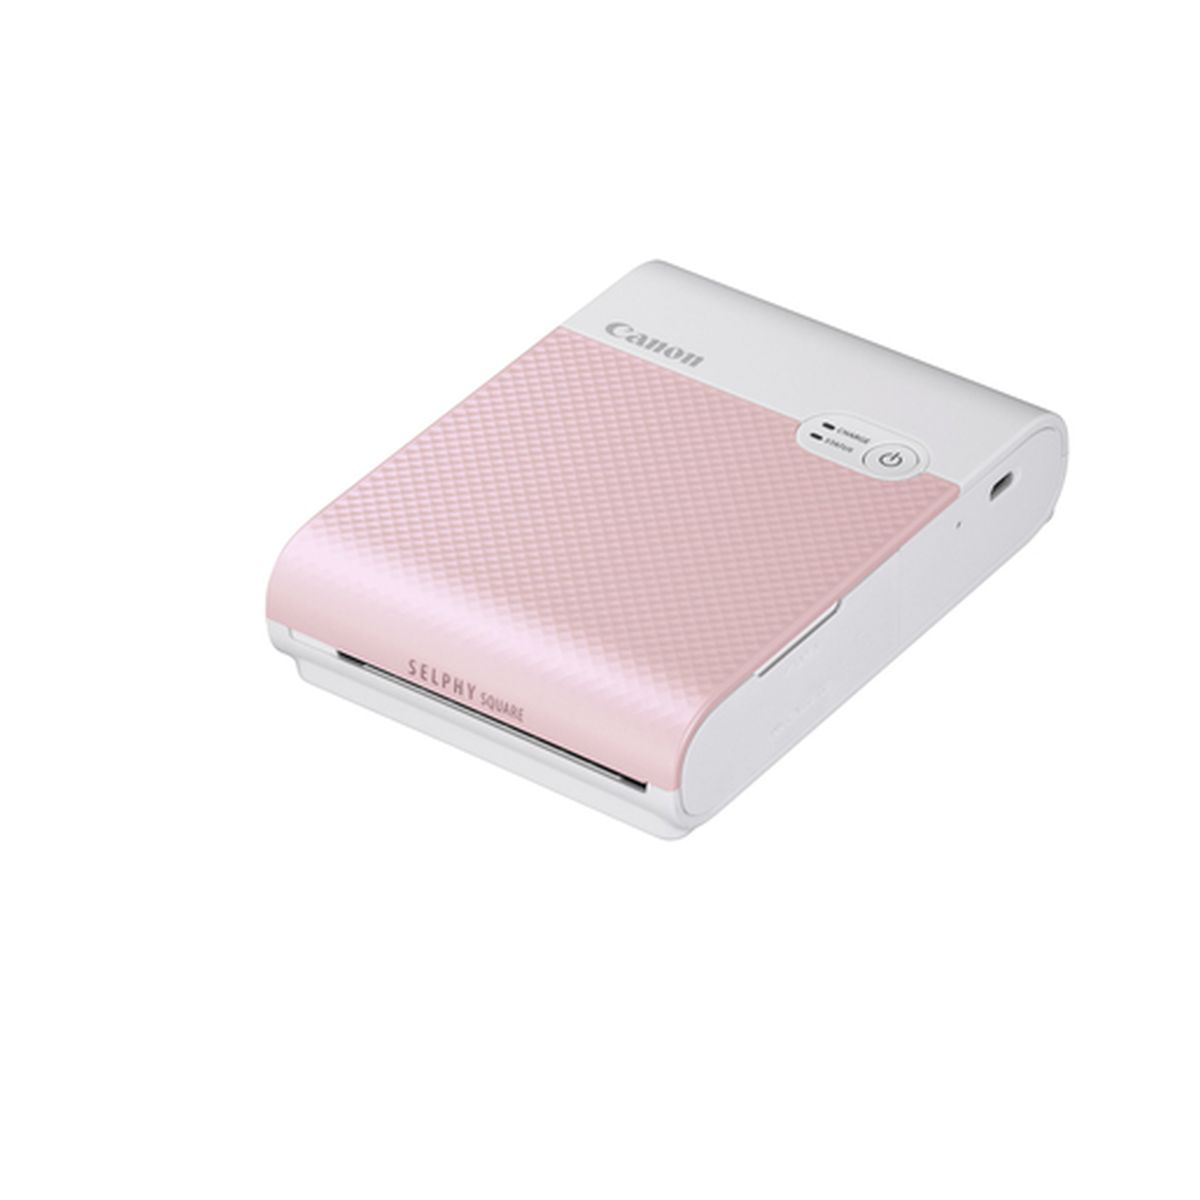 Canon Selphy Square QX10 pink Drucker